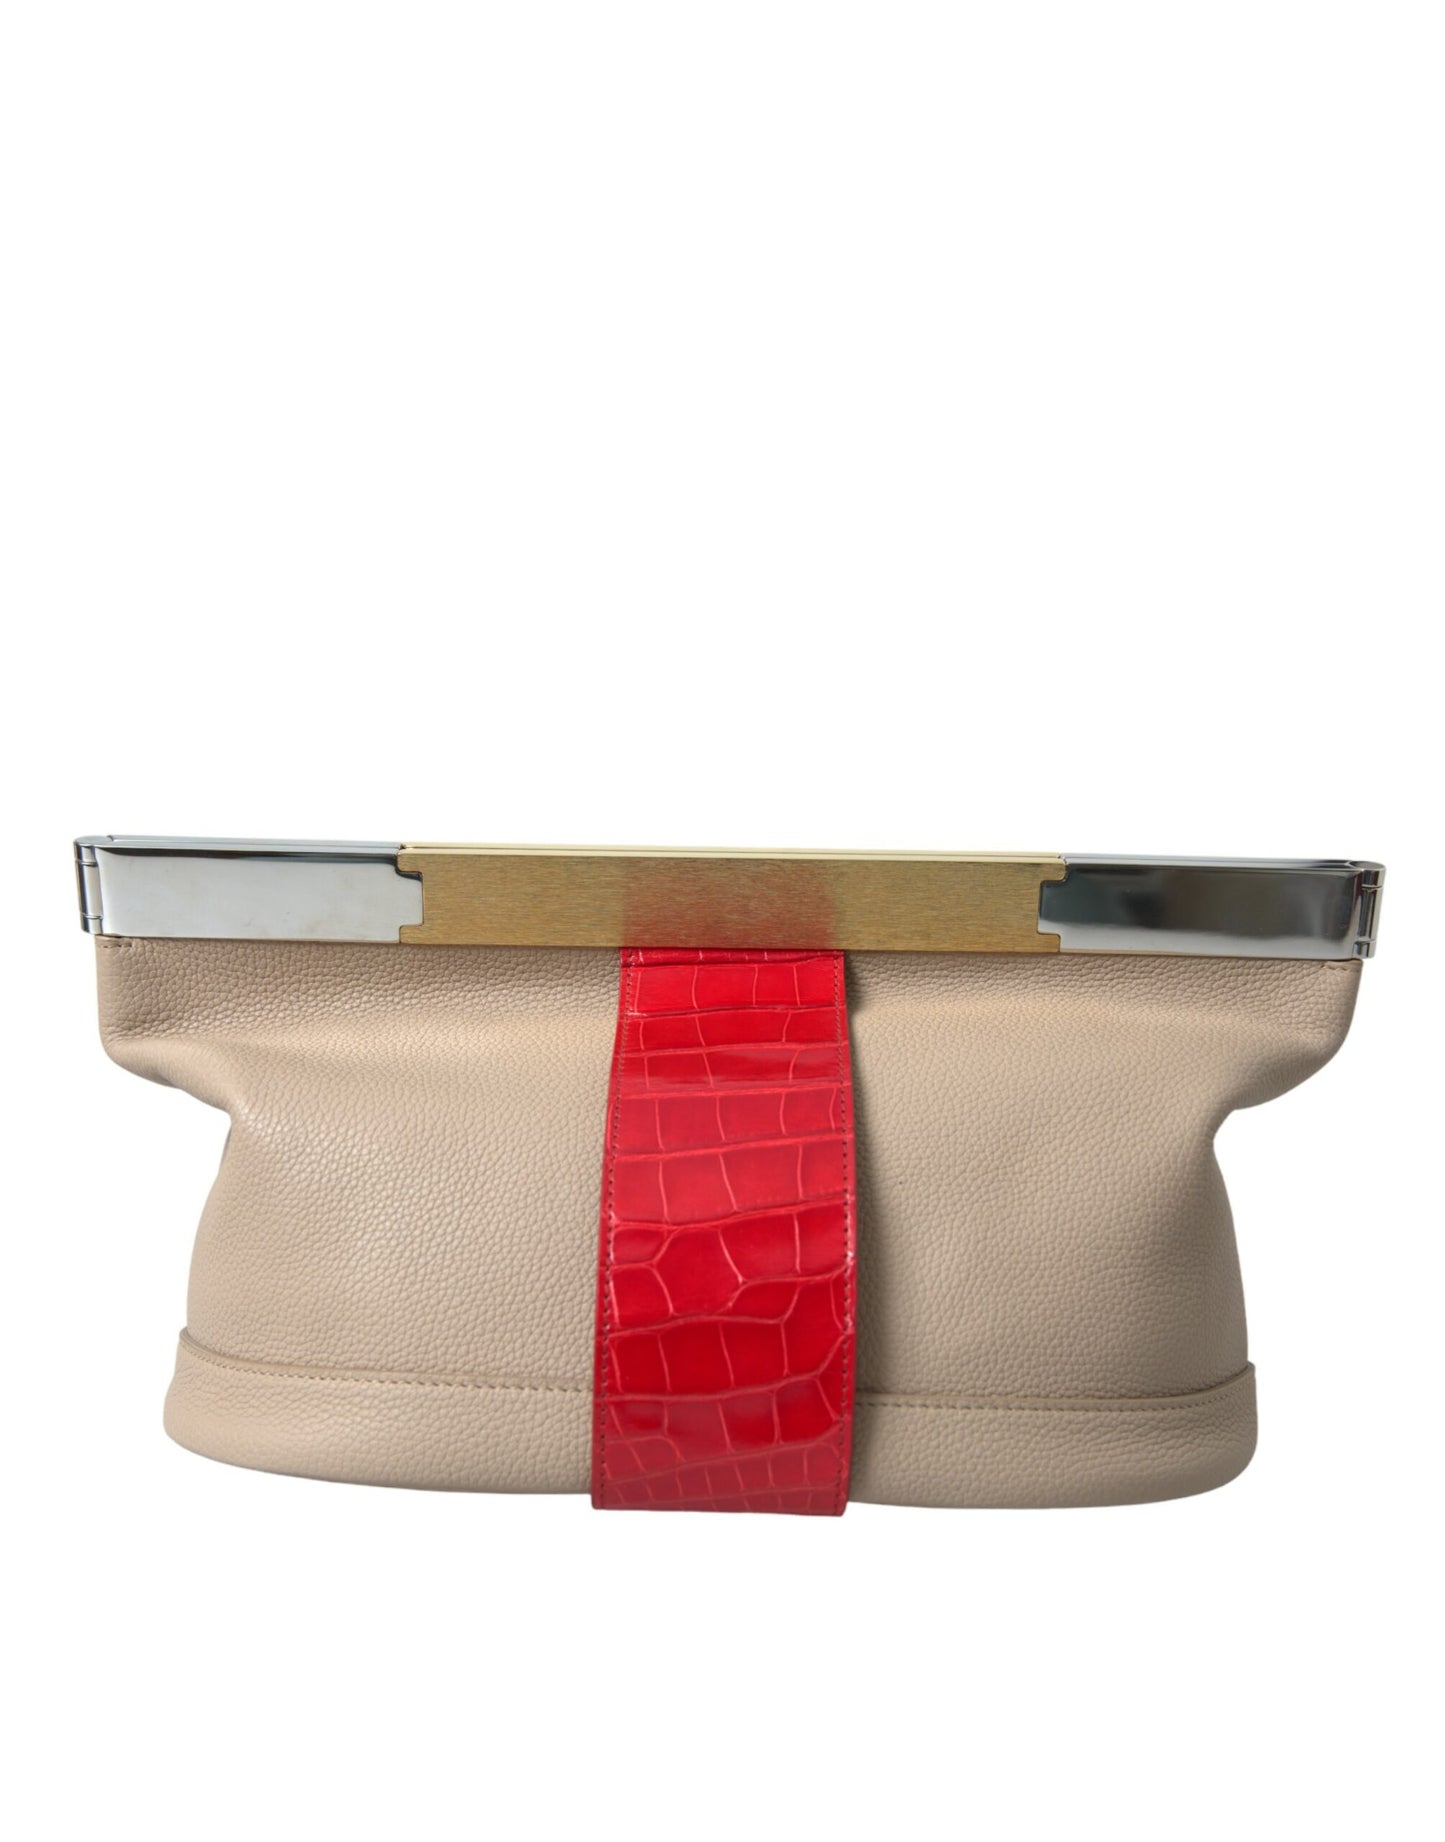 Two Tone Exotic Leather Clutch